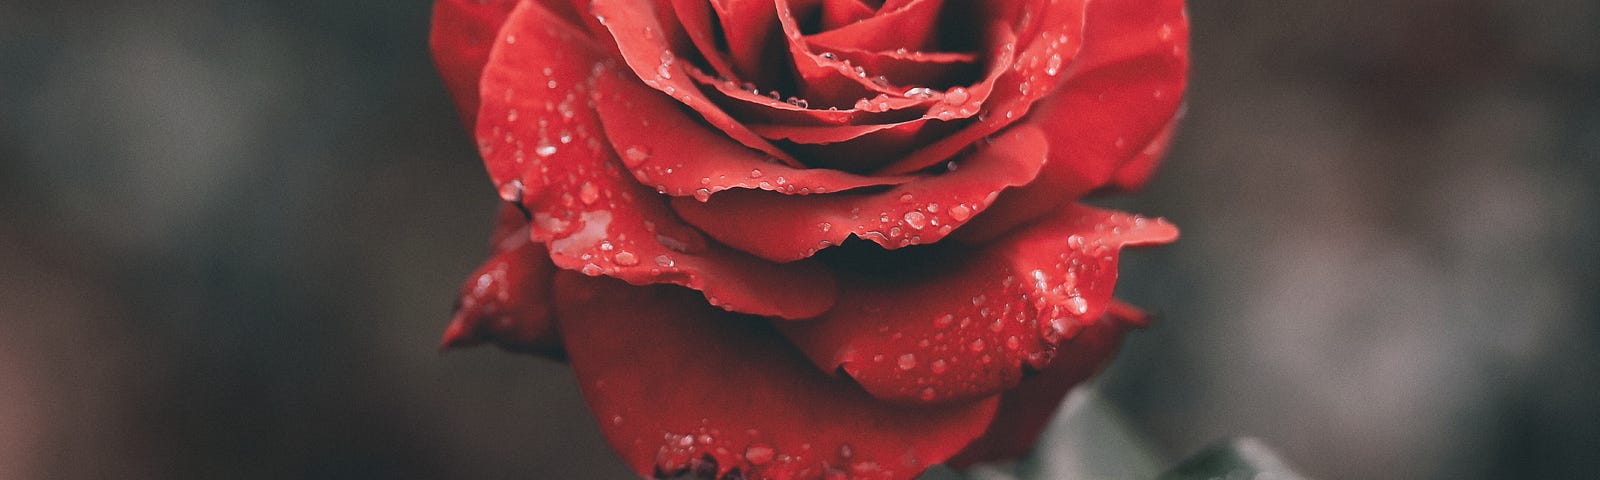 A red rose with water droplets.